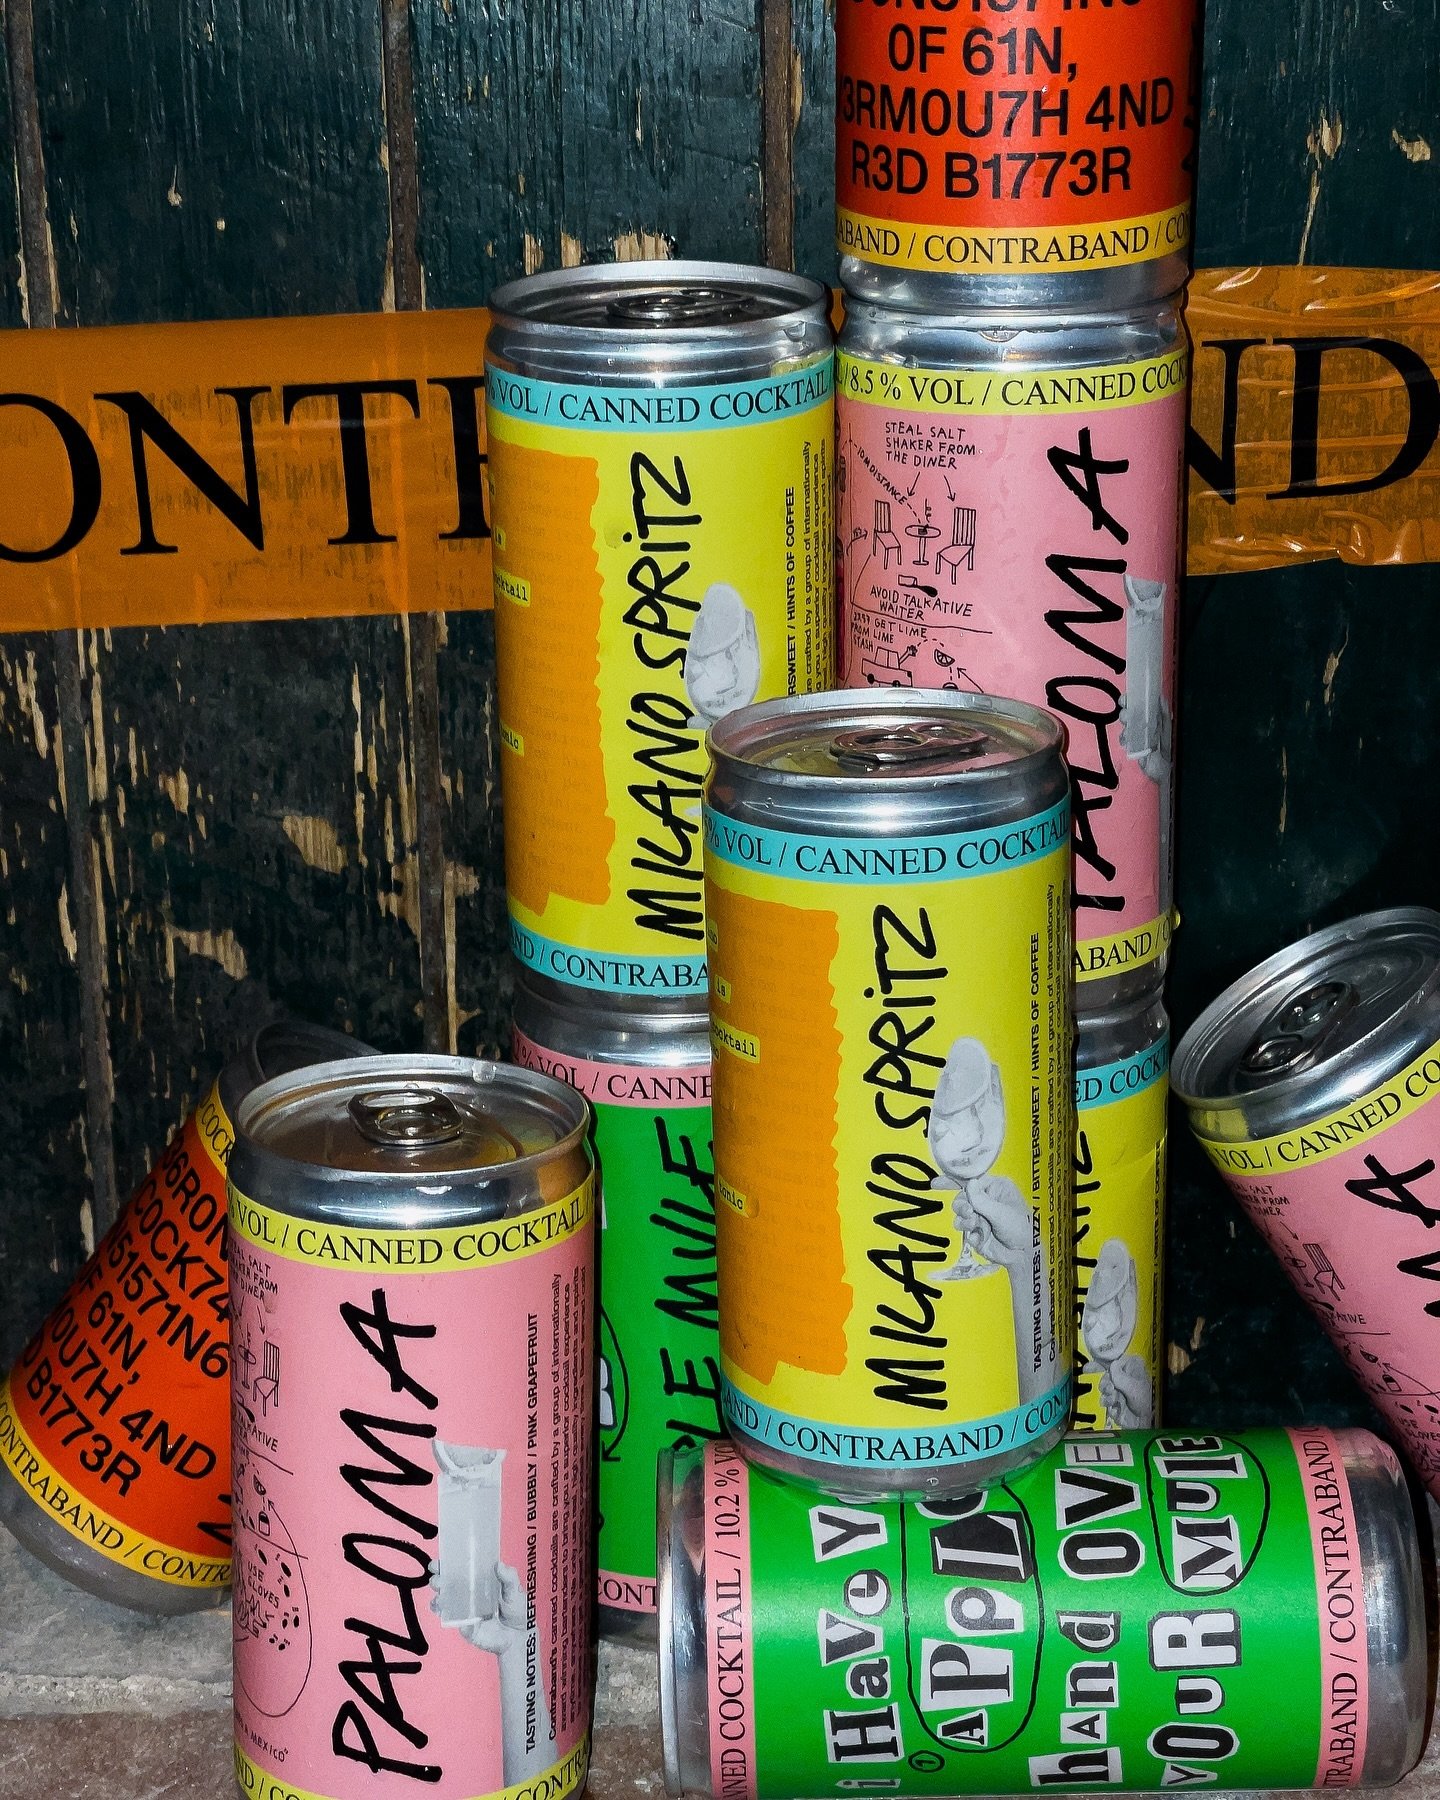 Can&rsquo;t decide? No worries, we&rsquo;ve got a can for every mood! 

And if you want even more cocktails to choose from we&rsquo;ve got some exciting news dropping soon👀